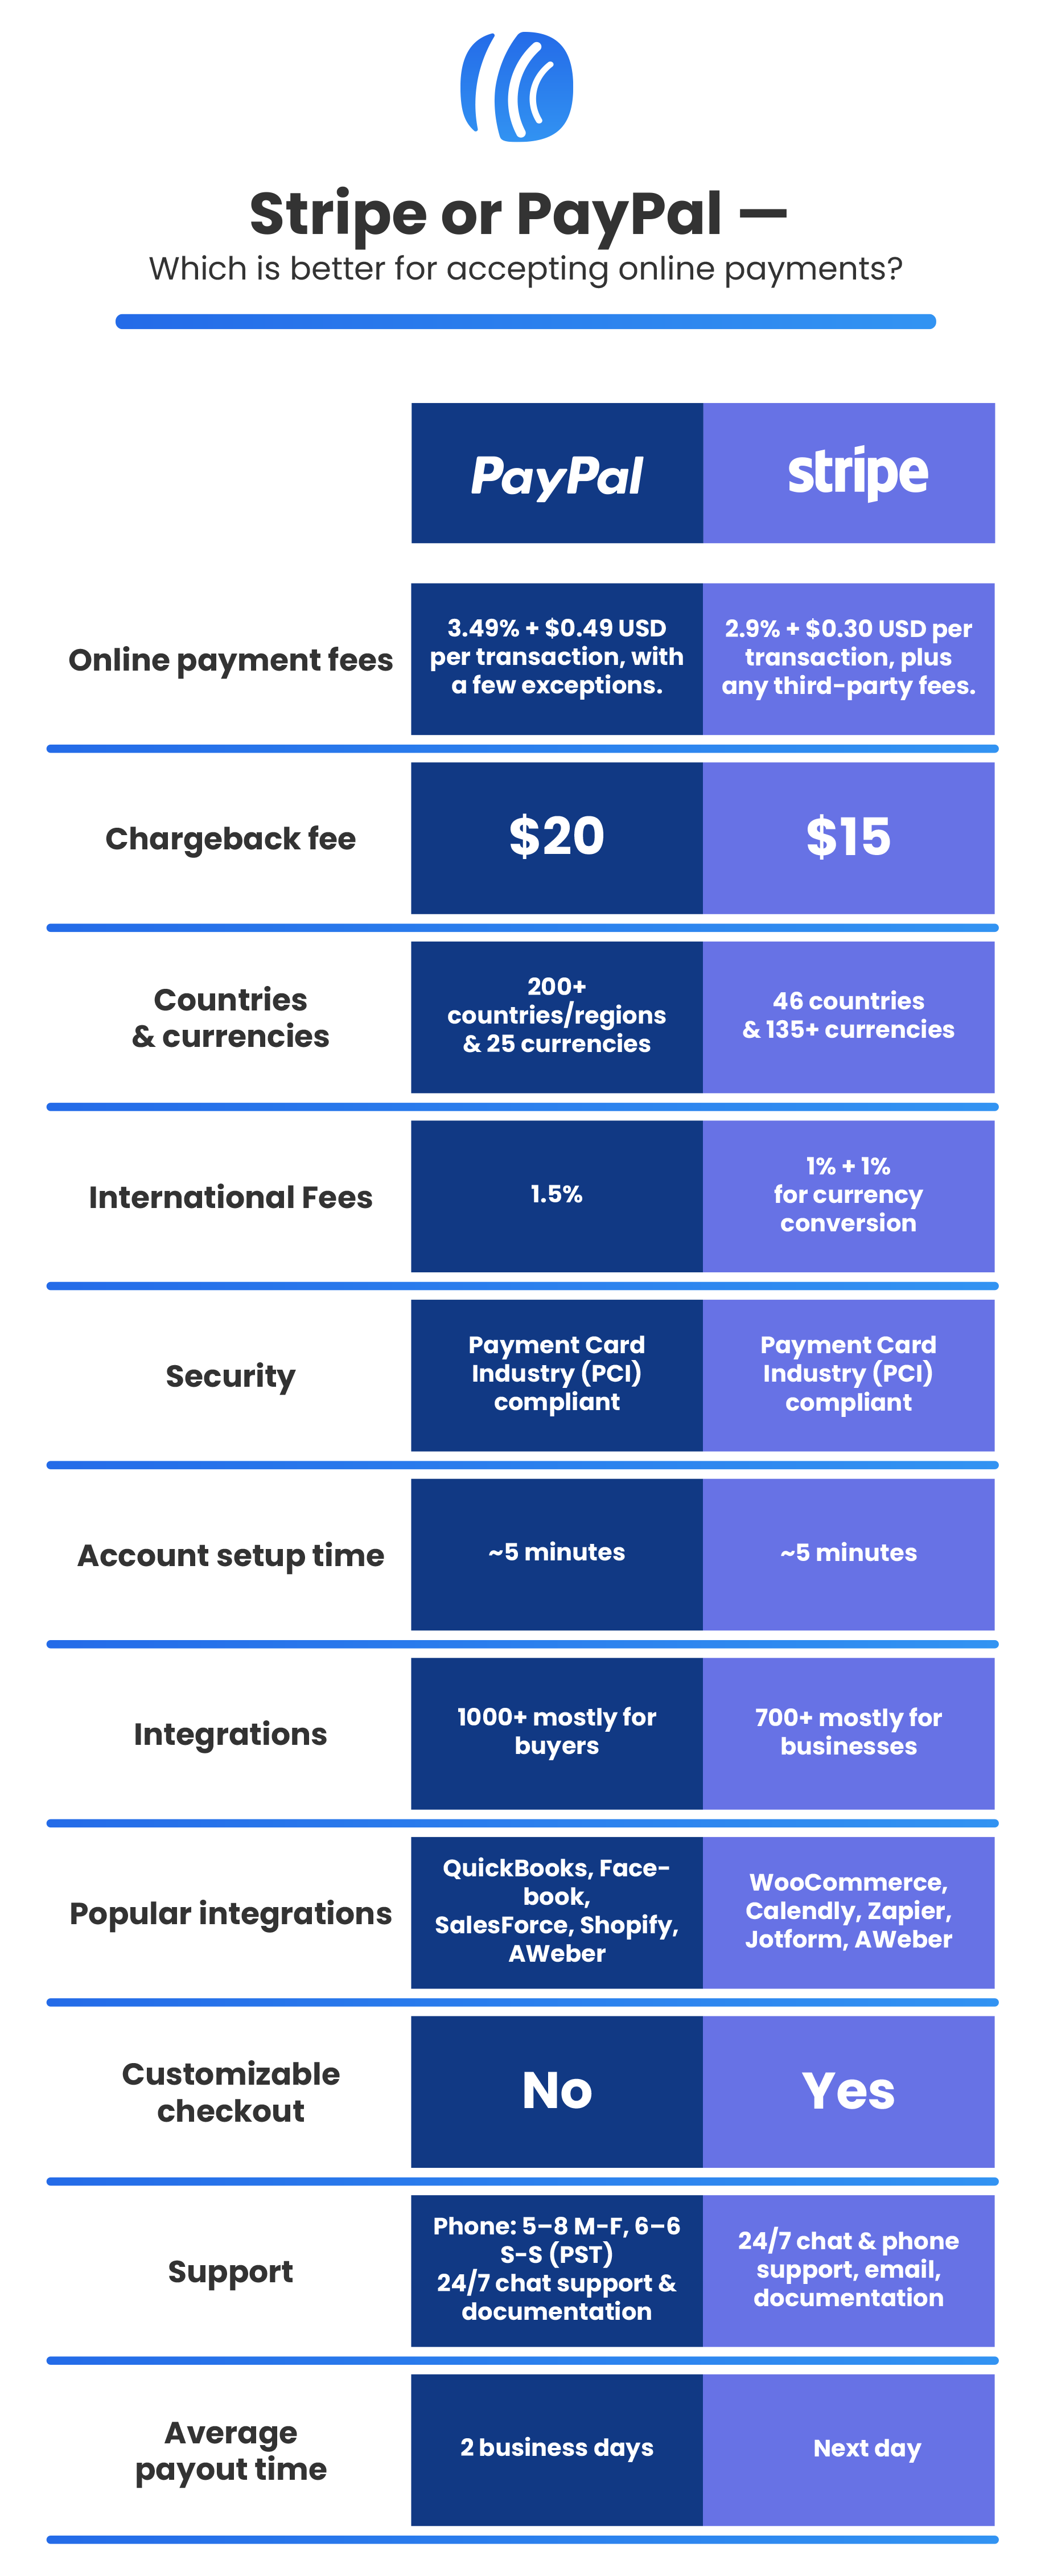 A comparison table of Stripe vs PayPal.

PayPal first
Stripe second

Online payment fees
3.49% + $0.49 USD per transaction, with a few exceptions.
2.9% + $0.30 USD per transaction, plus any third-party fees.
Chargeback fees
$20
$15
Countries & currencies
200+ countries/regions & 25 currencies
46 countries & 135+ currencies
International Fees
1.50%
1% + 1% for currency conversion if needed
Security
Payment Card Industry (PCI) compliant
Payment Card Industry (PCI) compliant
Account setup time
~5 minutes
~5 minutes
Integrations
700+ mostly for businesses
1000+ mostly for buyers
Popular integrations
WooCommerce, Calendly, Zapier, Jotform, AWeber, 
QuickBooks, Facebook, SalesForce, Shopify, AWeber
Customizable checkout
Yes
No
Support
24/7 chat and phone support, email, documentation
Phone: 5–8 M-F, 6–6 S-S (PST)
24/7 chat support & documentation
Average payout time
2 business days
Next day
